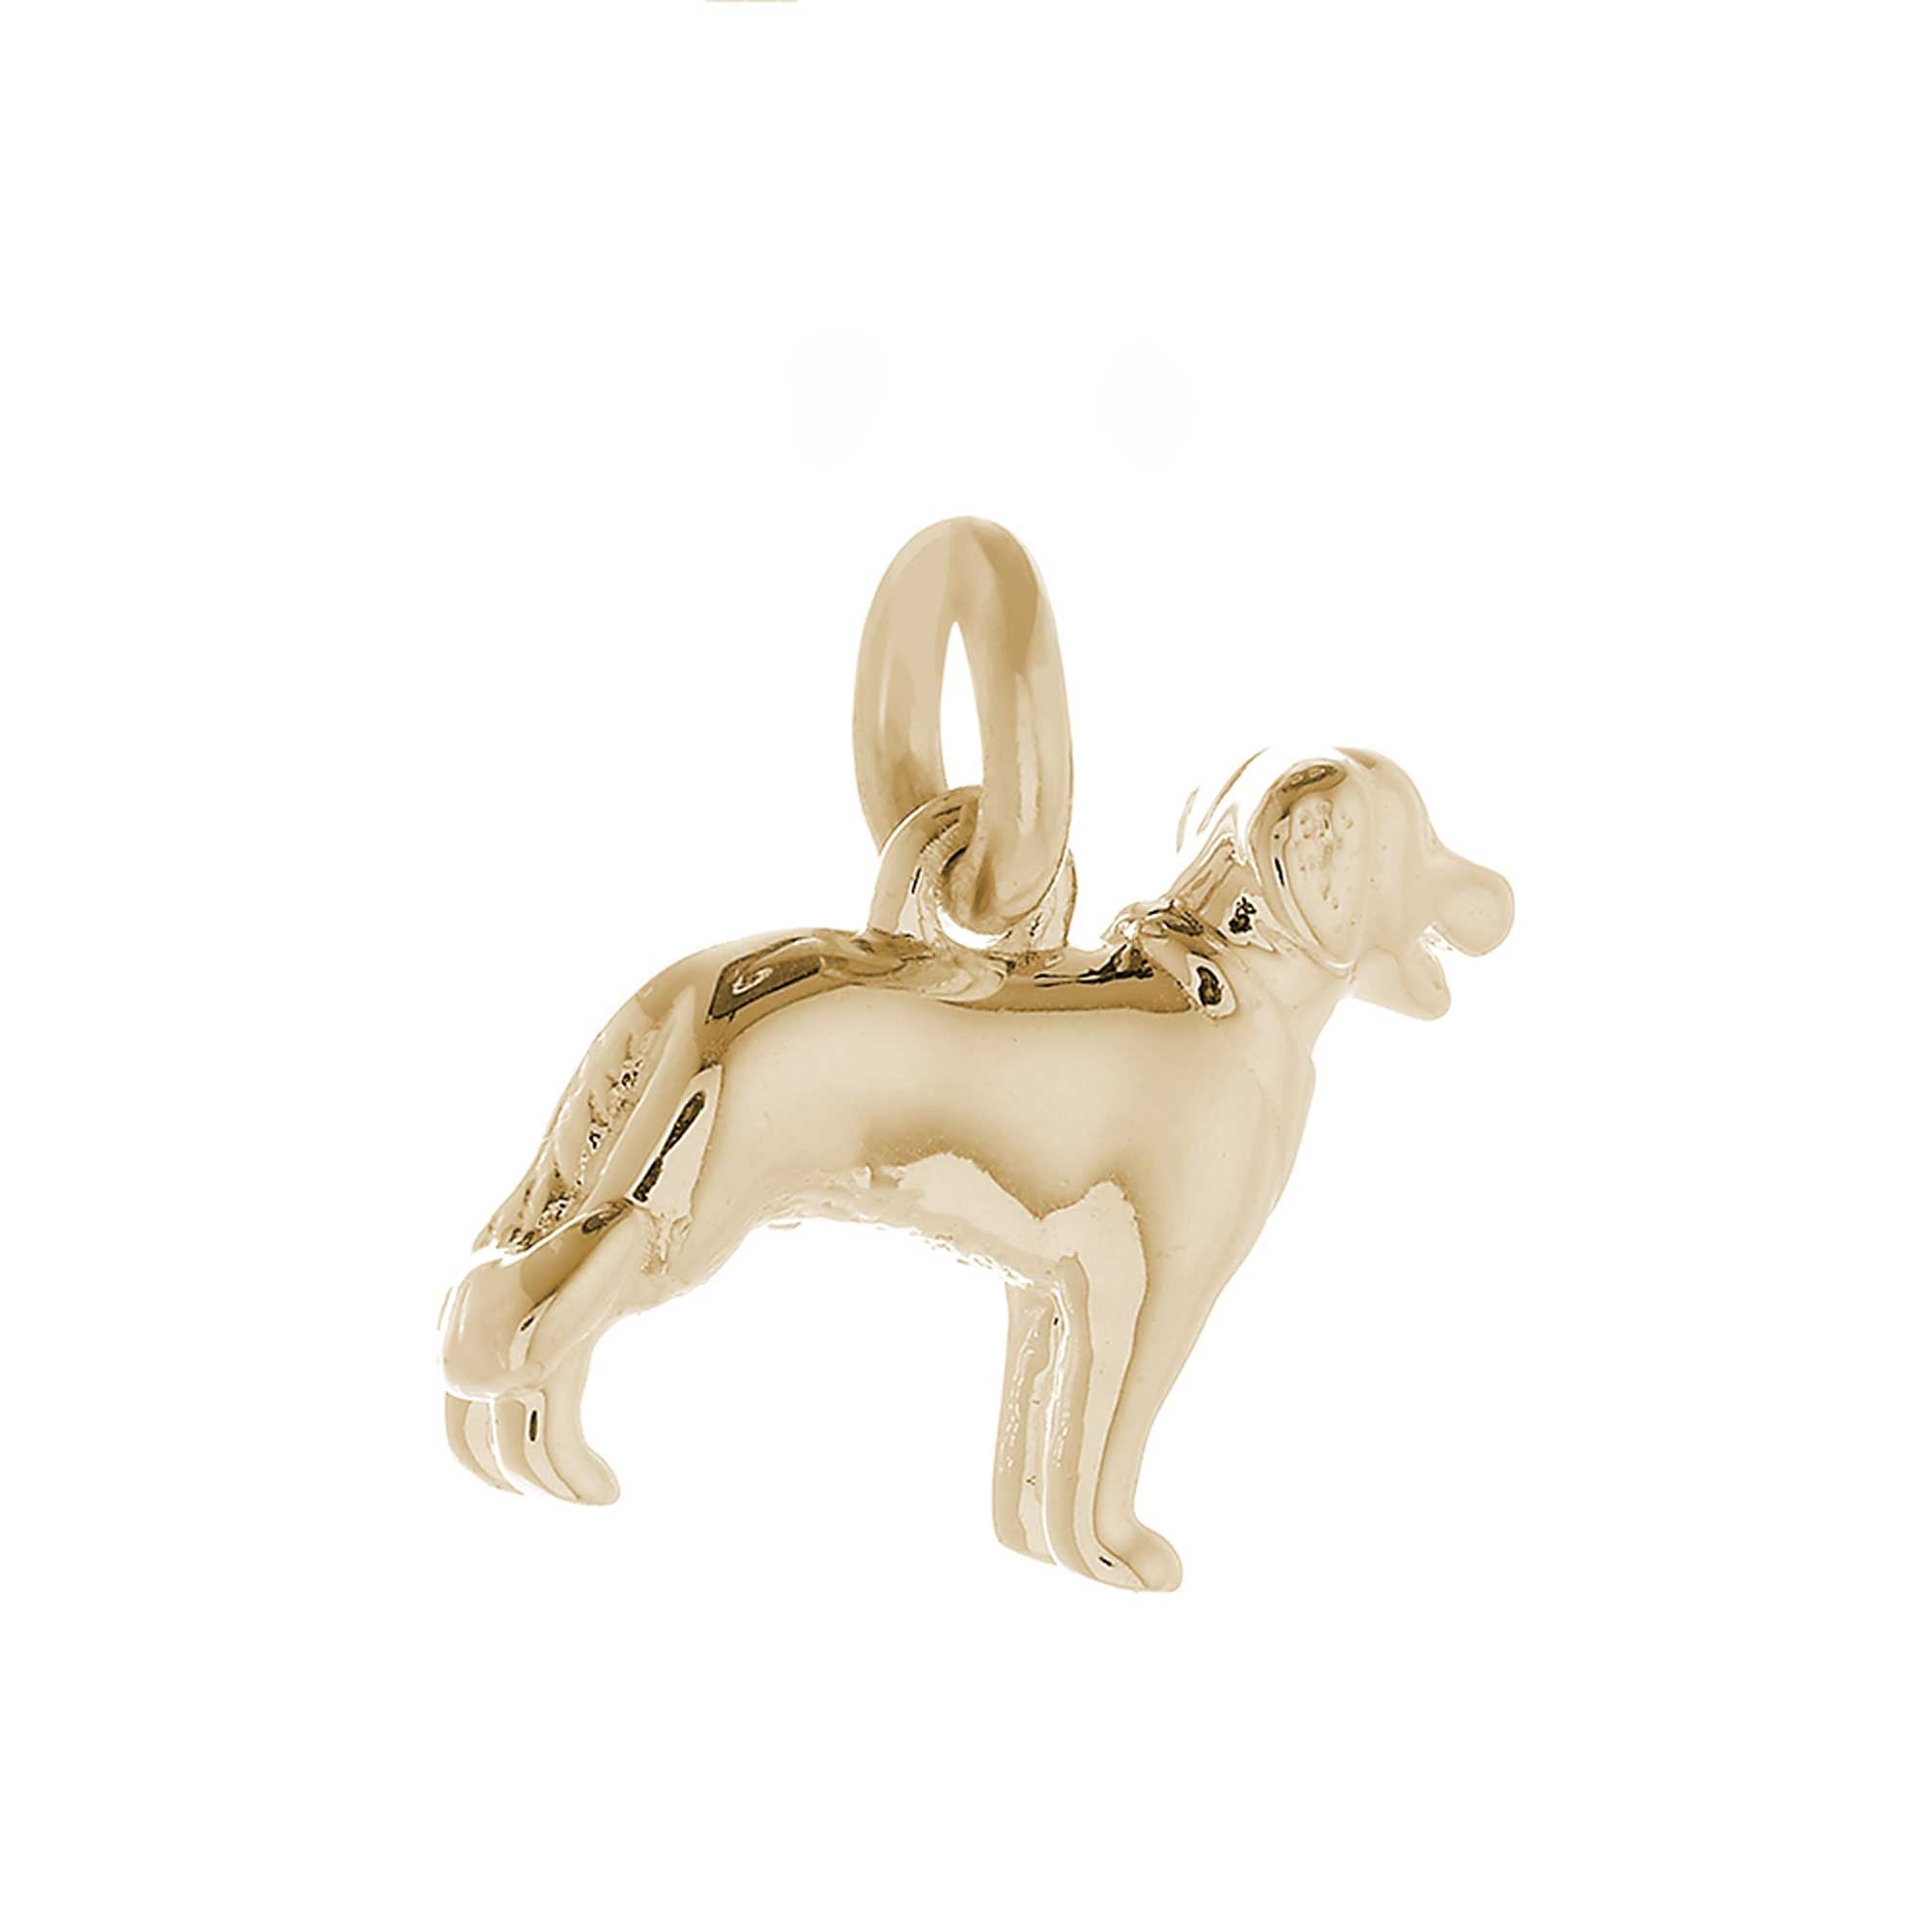 Solid 9ct gold Golden Retriever charm with tiny bandana, perfect for a charm bracelet or necklace.